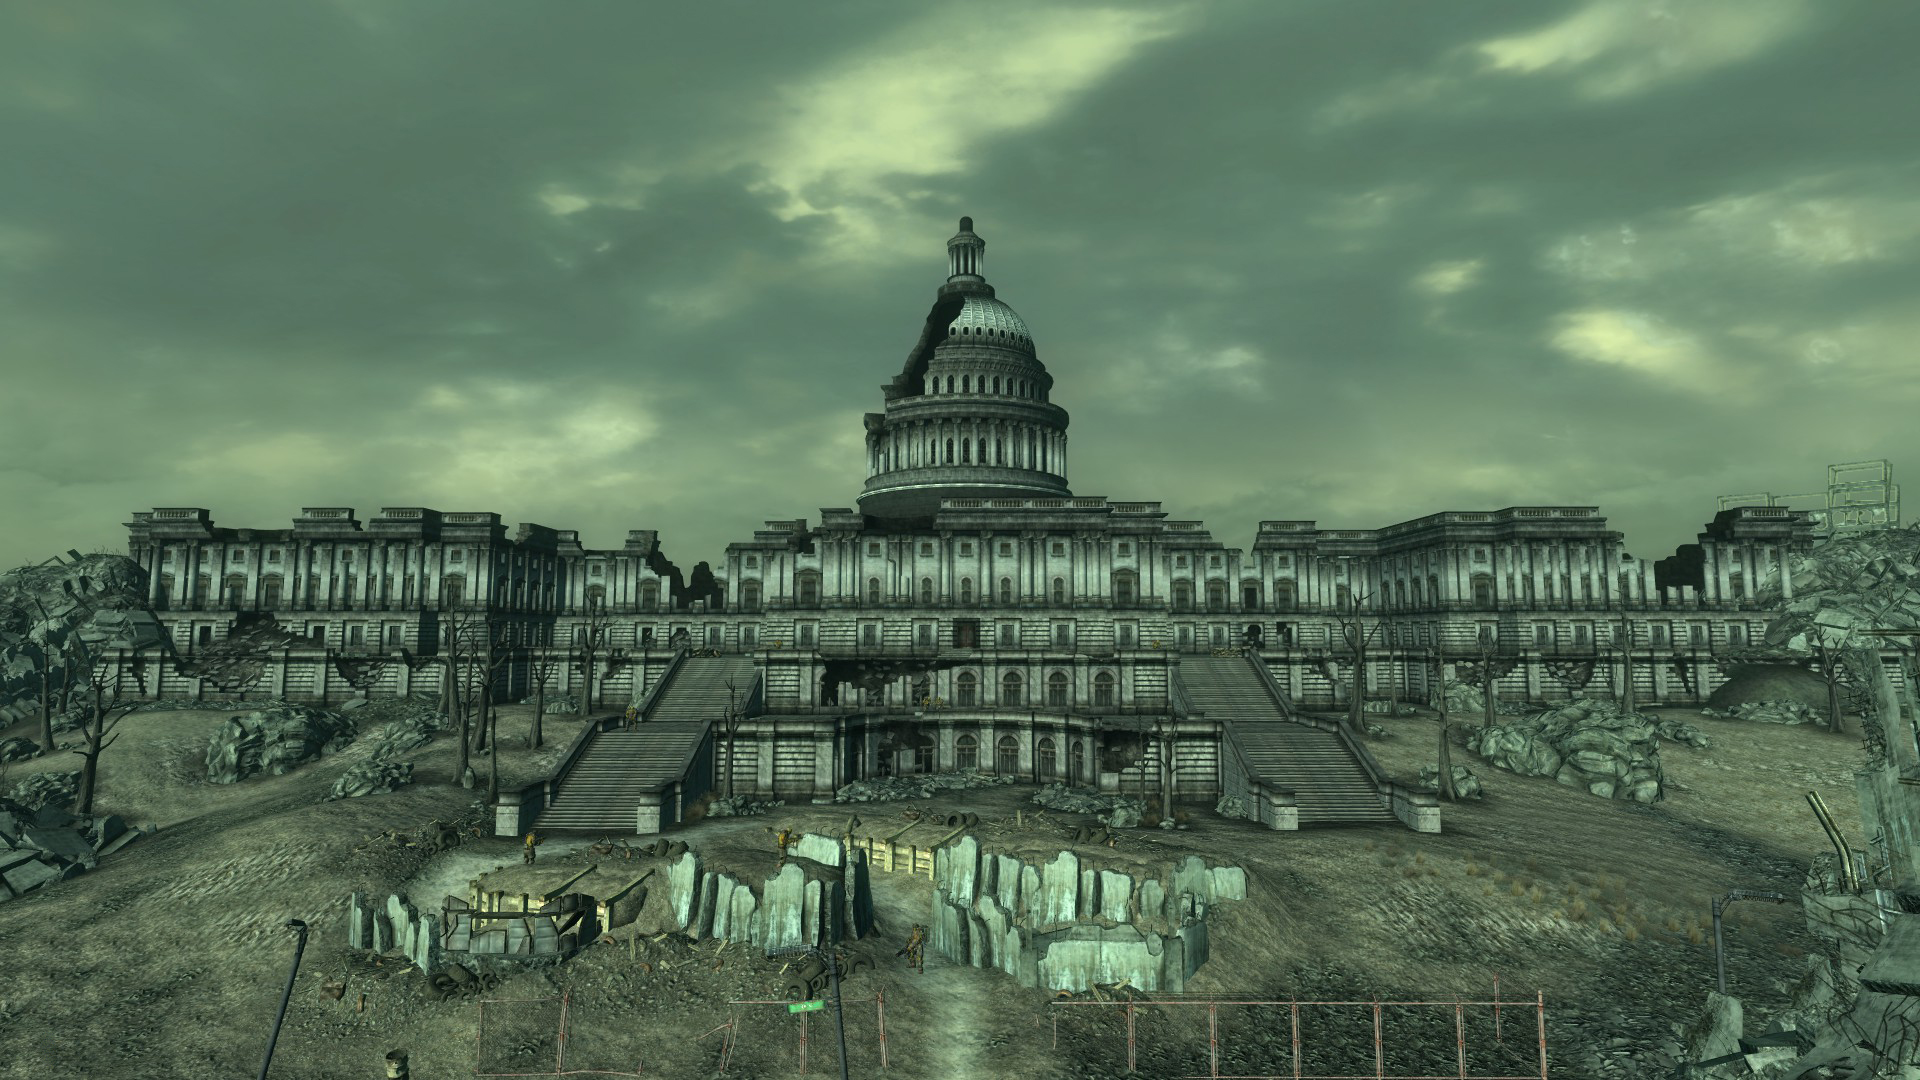 https://static.wikia.nocookie.net/fallout/images/7/76/The_Capitol.jpg/revision/latest?cb=20231013214756